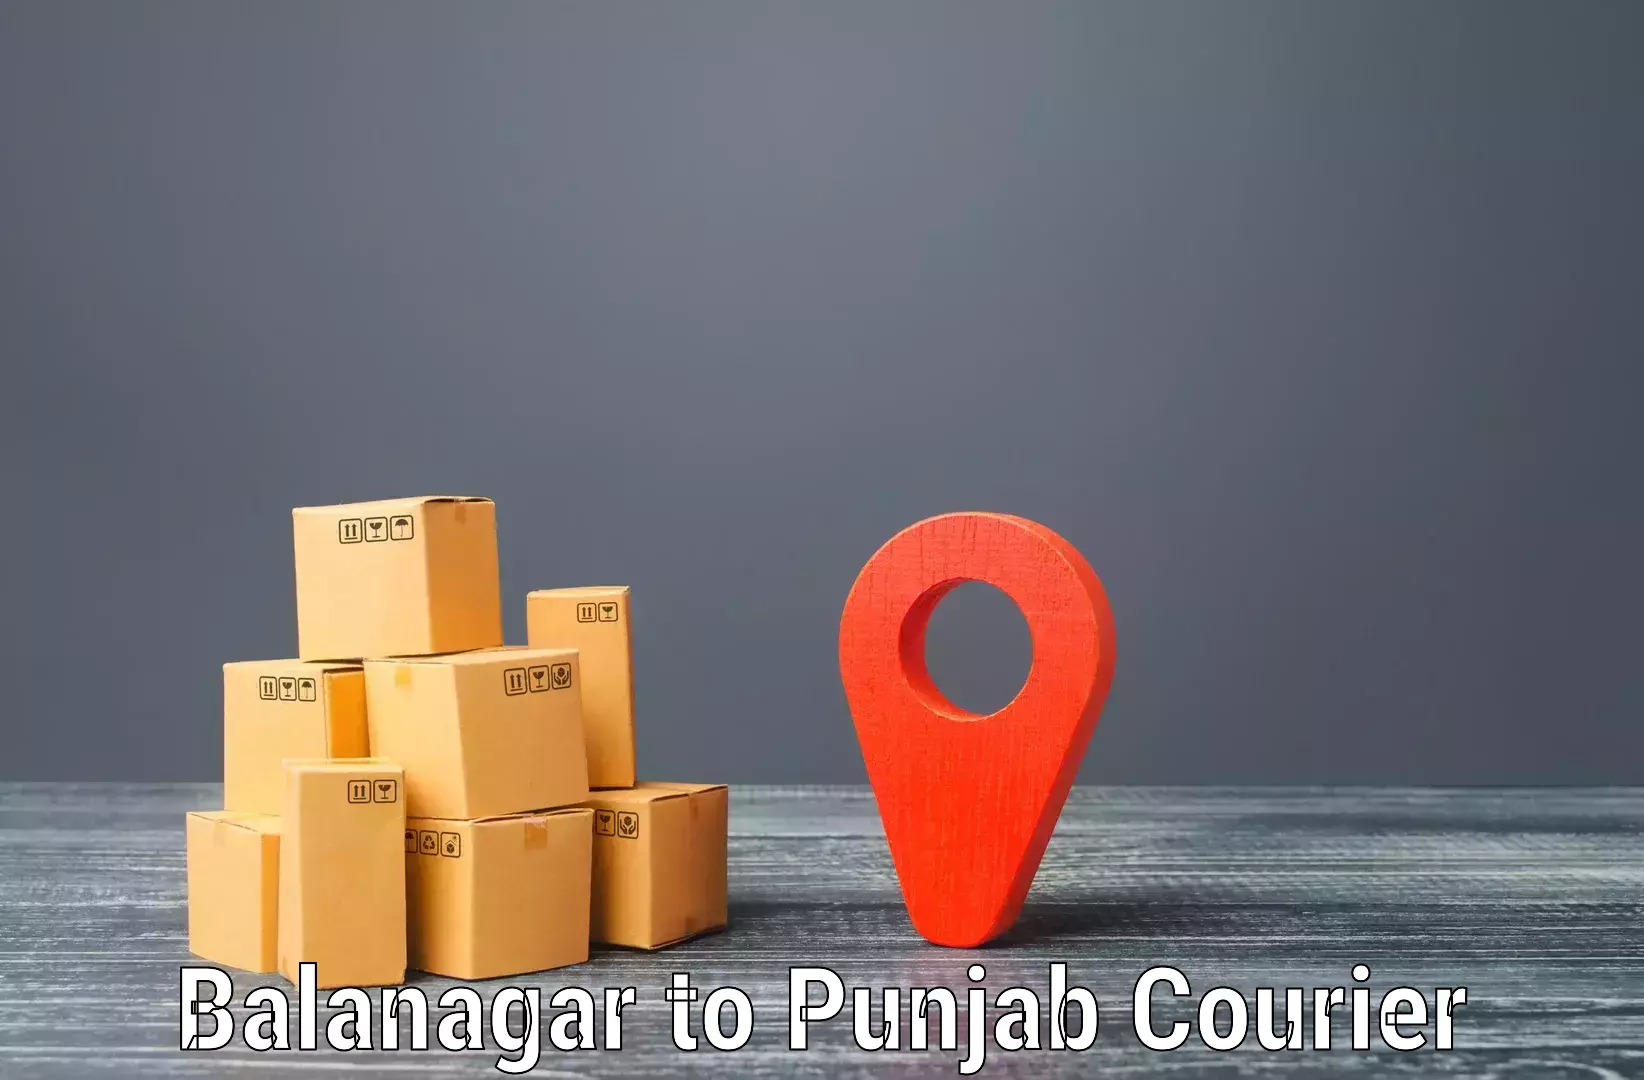 Courier service comparison Balanagar to Thapar Institute of Engineering and Technology Patiala